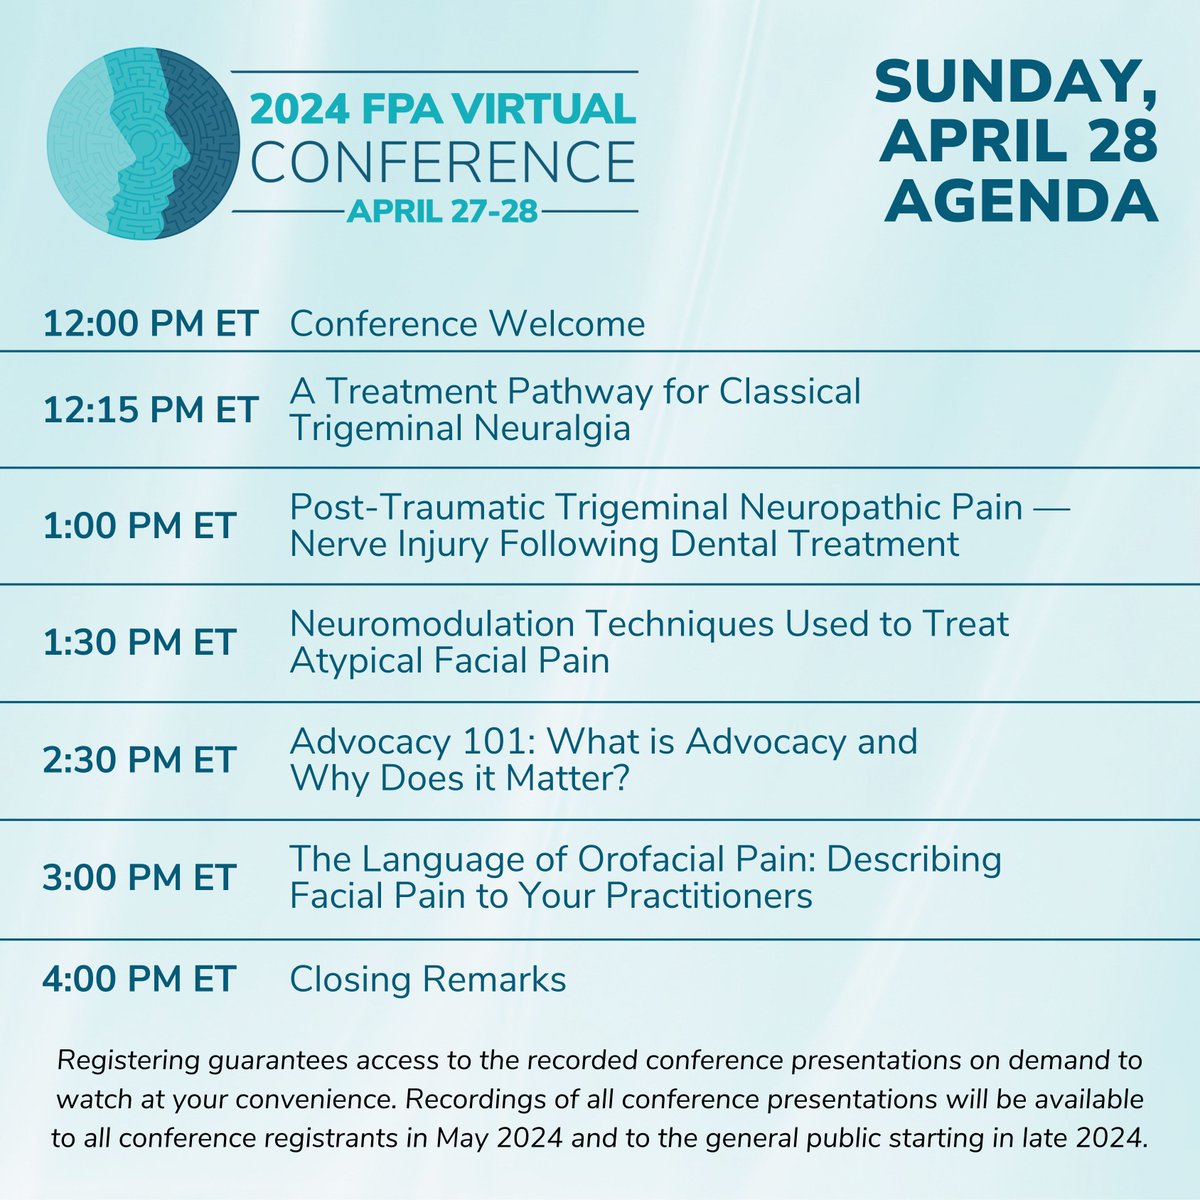 The 2024 FPA Conference continues today with a full day of educational presentations from 12:00 PM ET to 4:15 PM ET. If you have not yet registered and want to join us today, this is your last chance! Visit facepain.org/2024-fpa-confe… to register now.